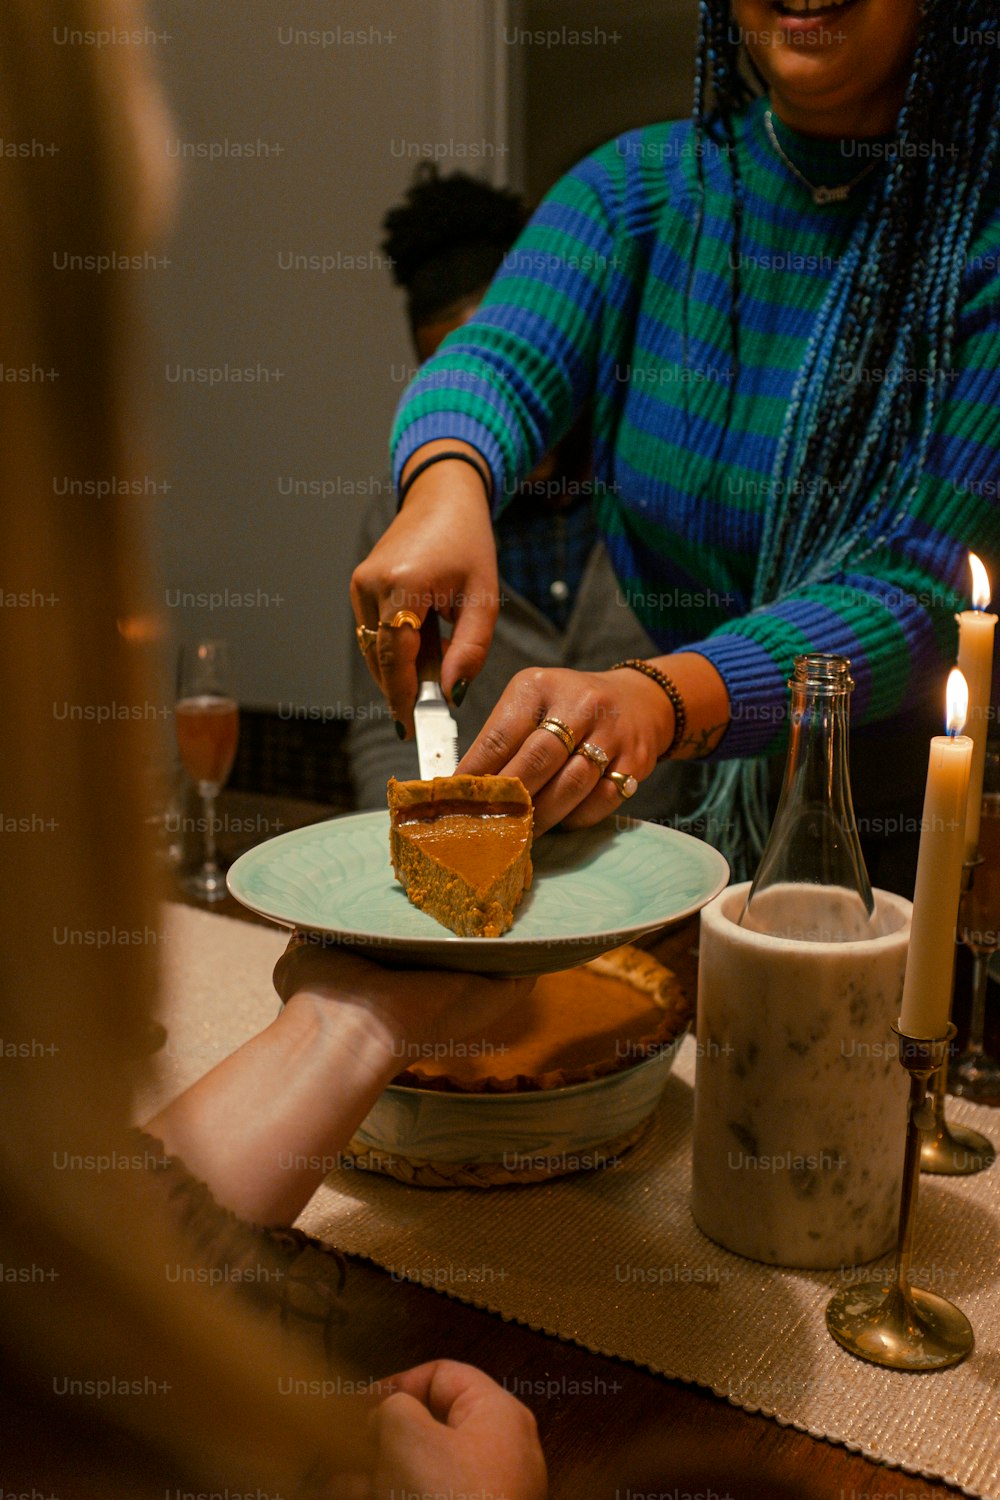 a woman cutting a piece of pie on a plate